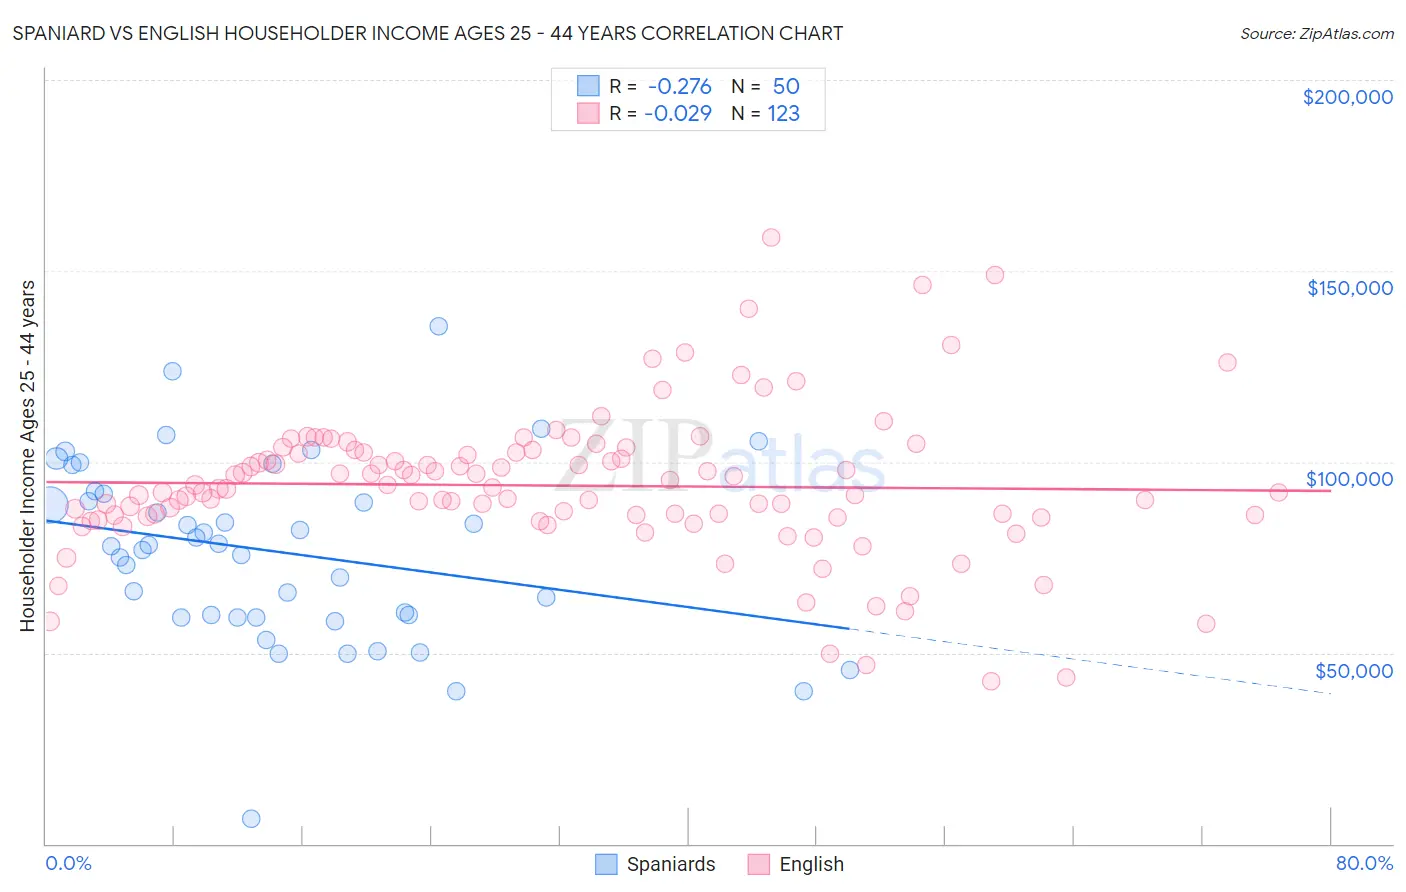 Spaniard vs English Householder Income Ages 25 - 44 years